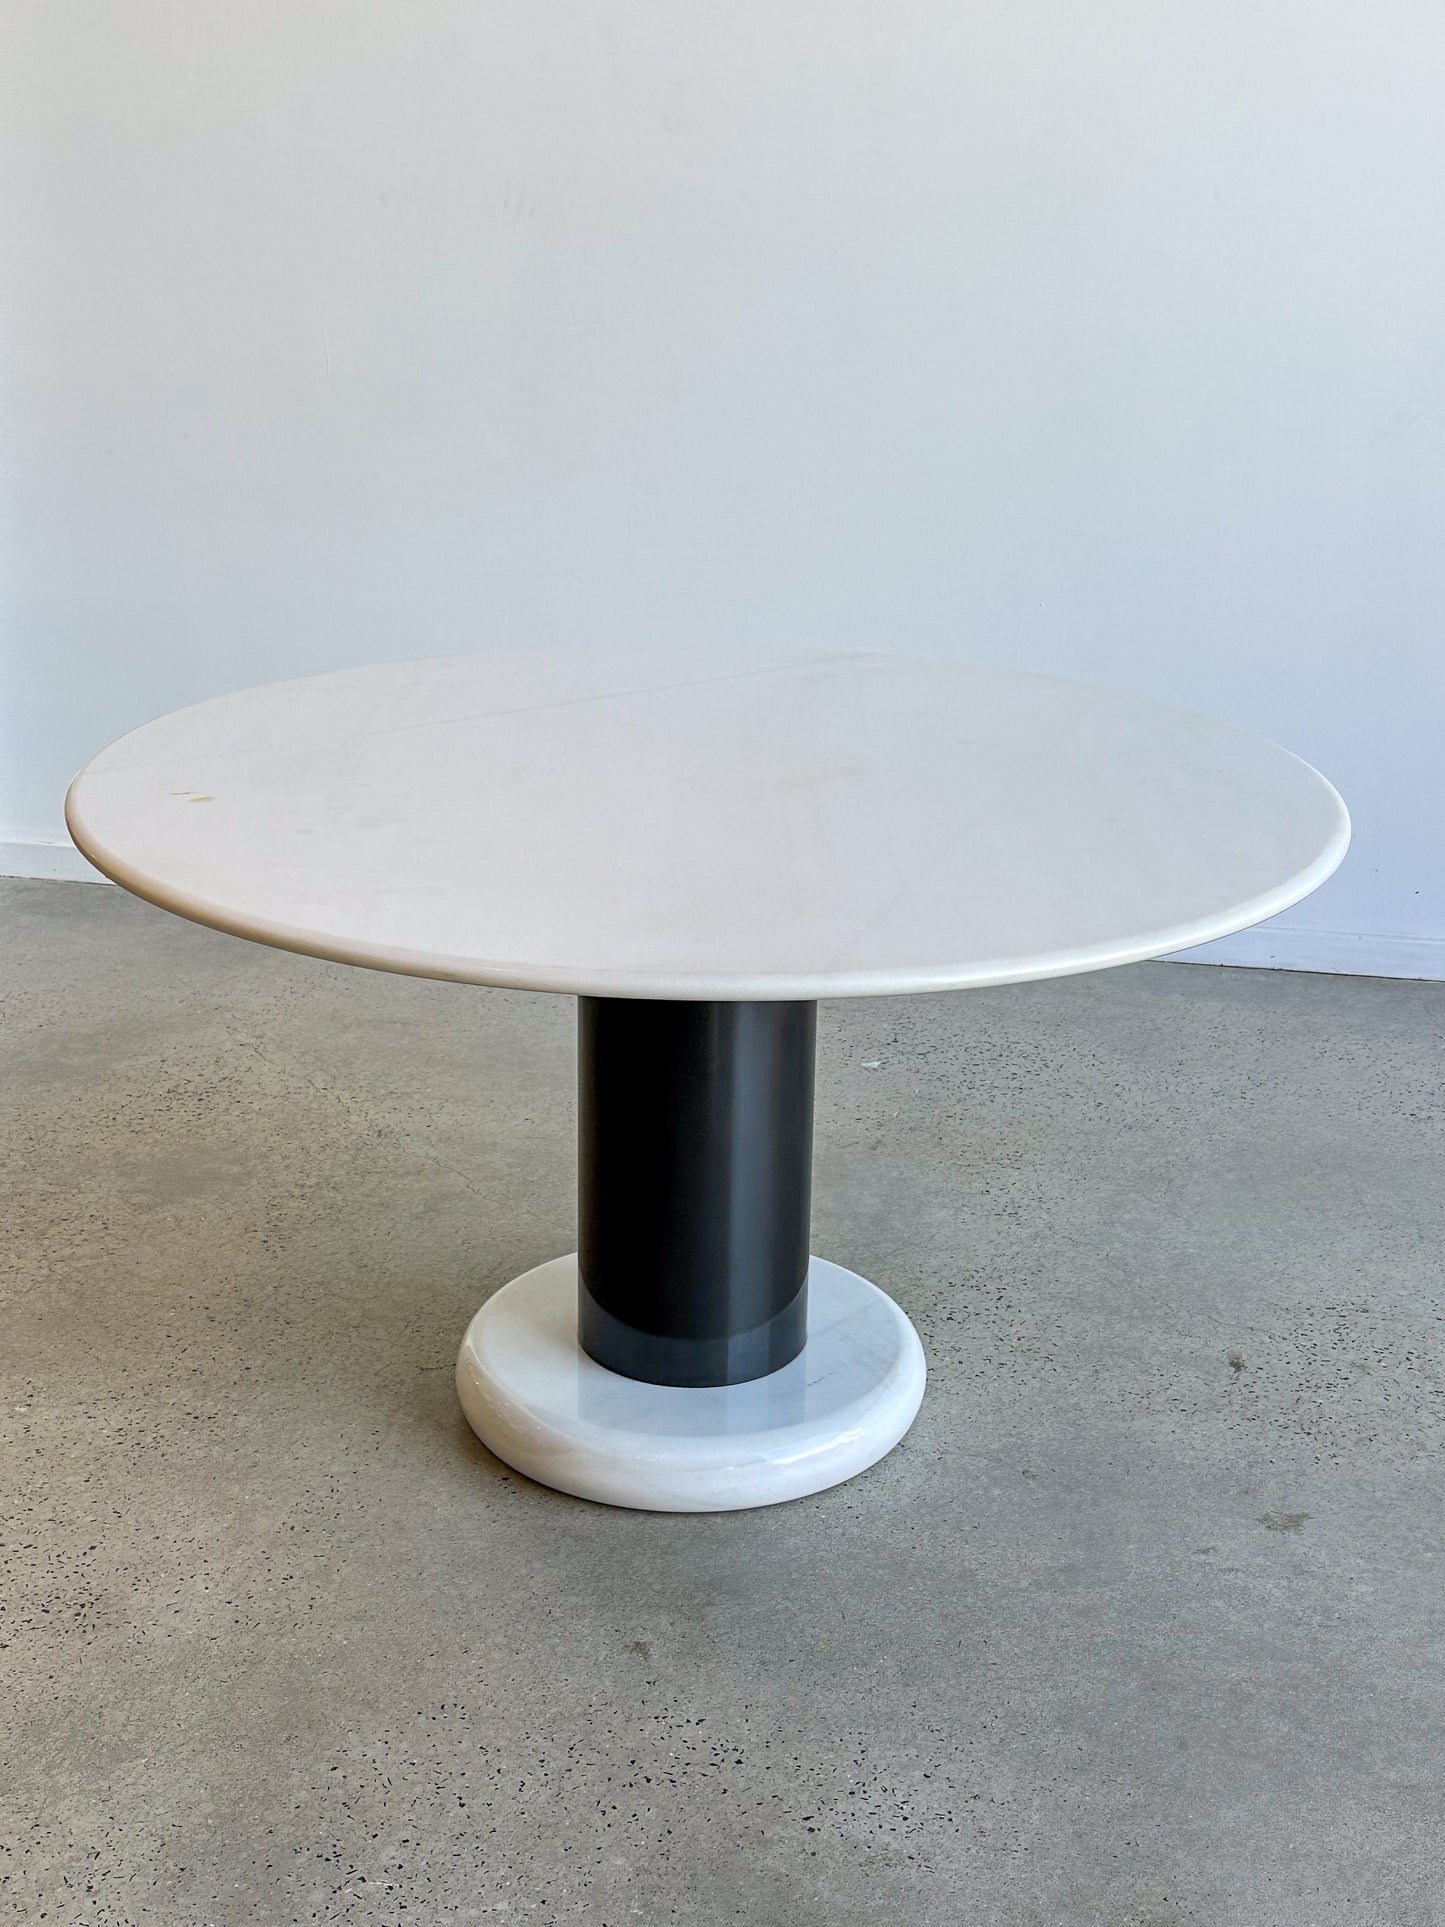 Ettore Sottsass for Poltronova Dining Table ‘Loto’ in Carrara White Marble